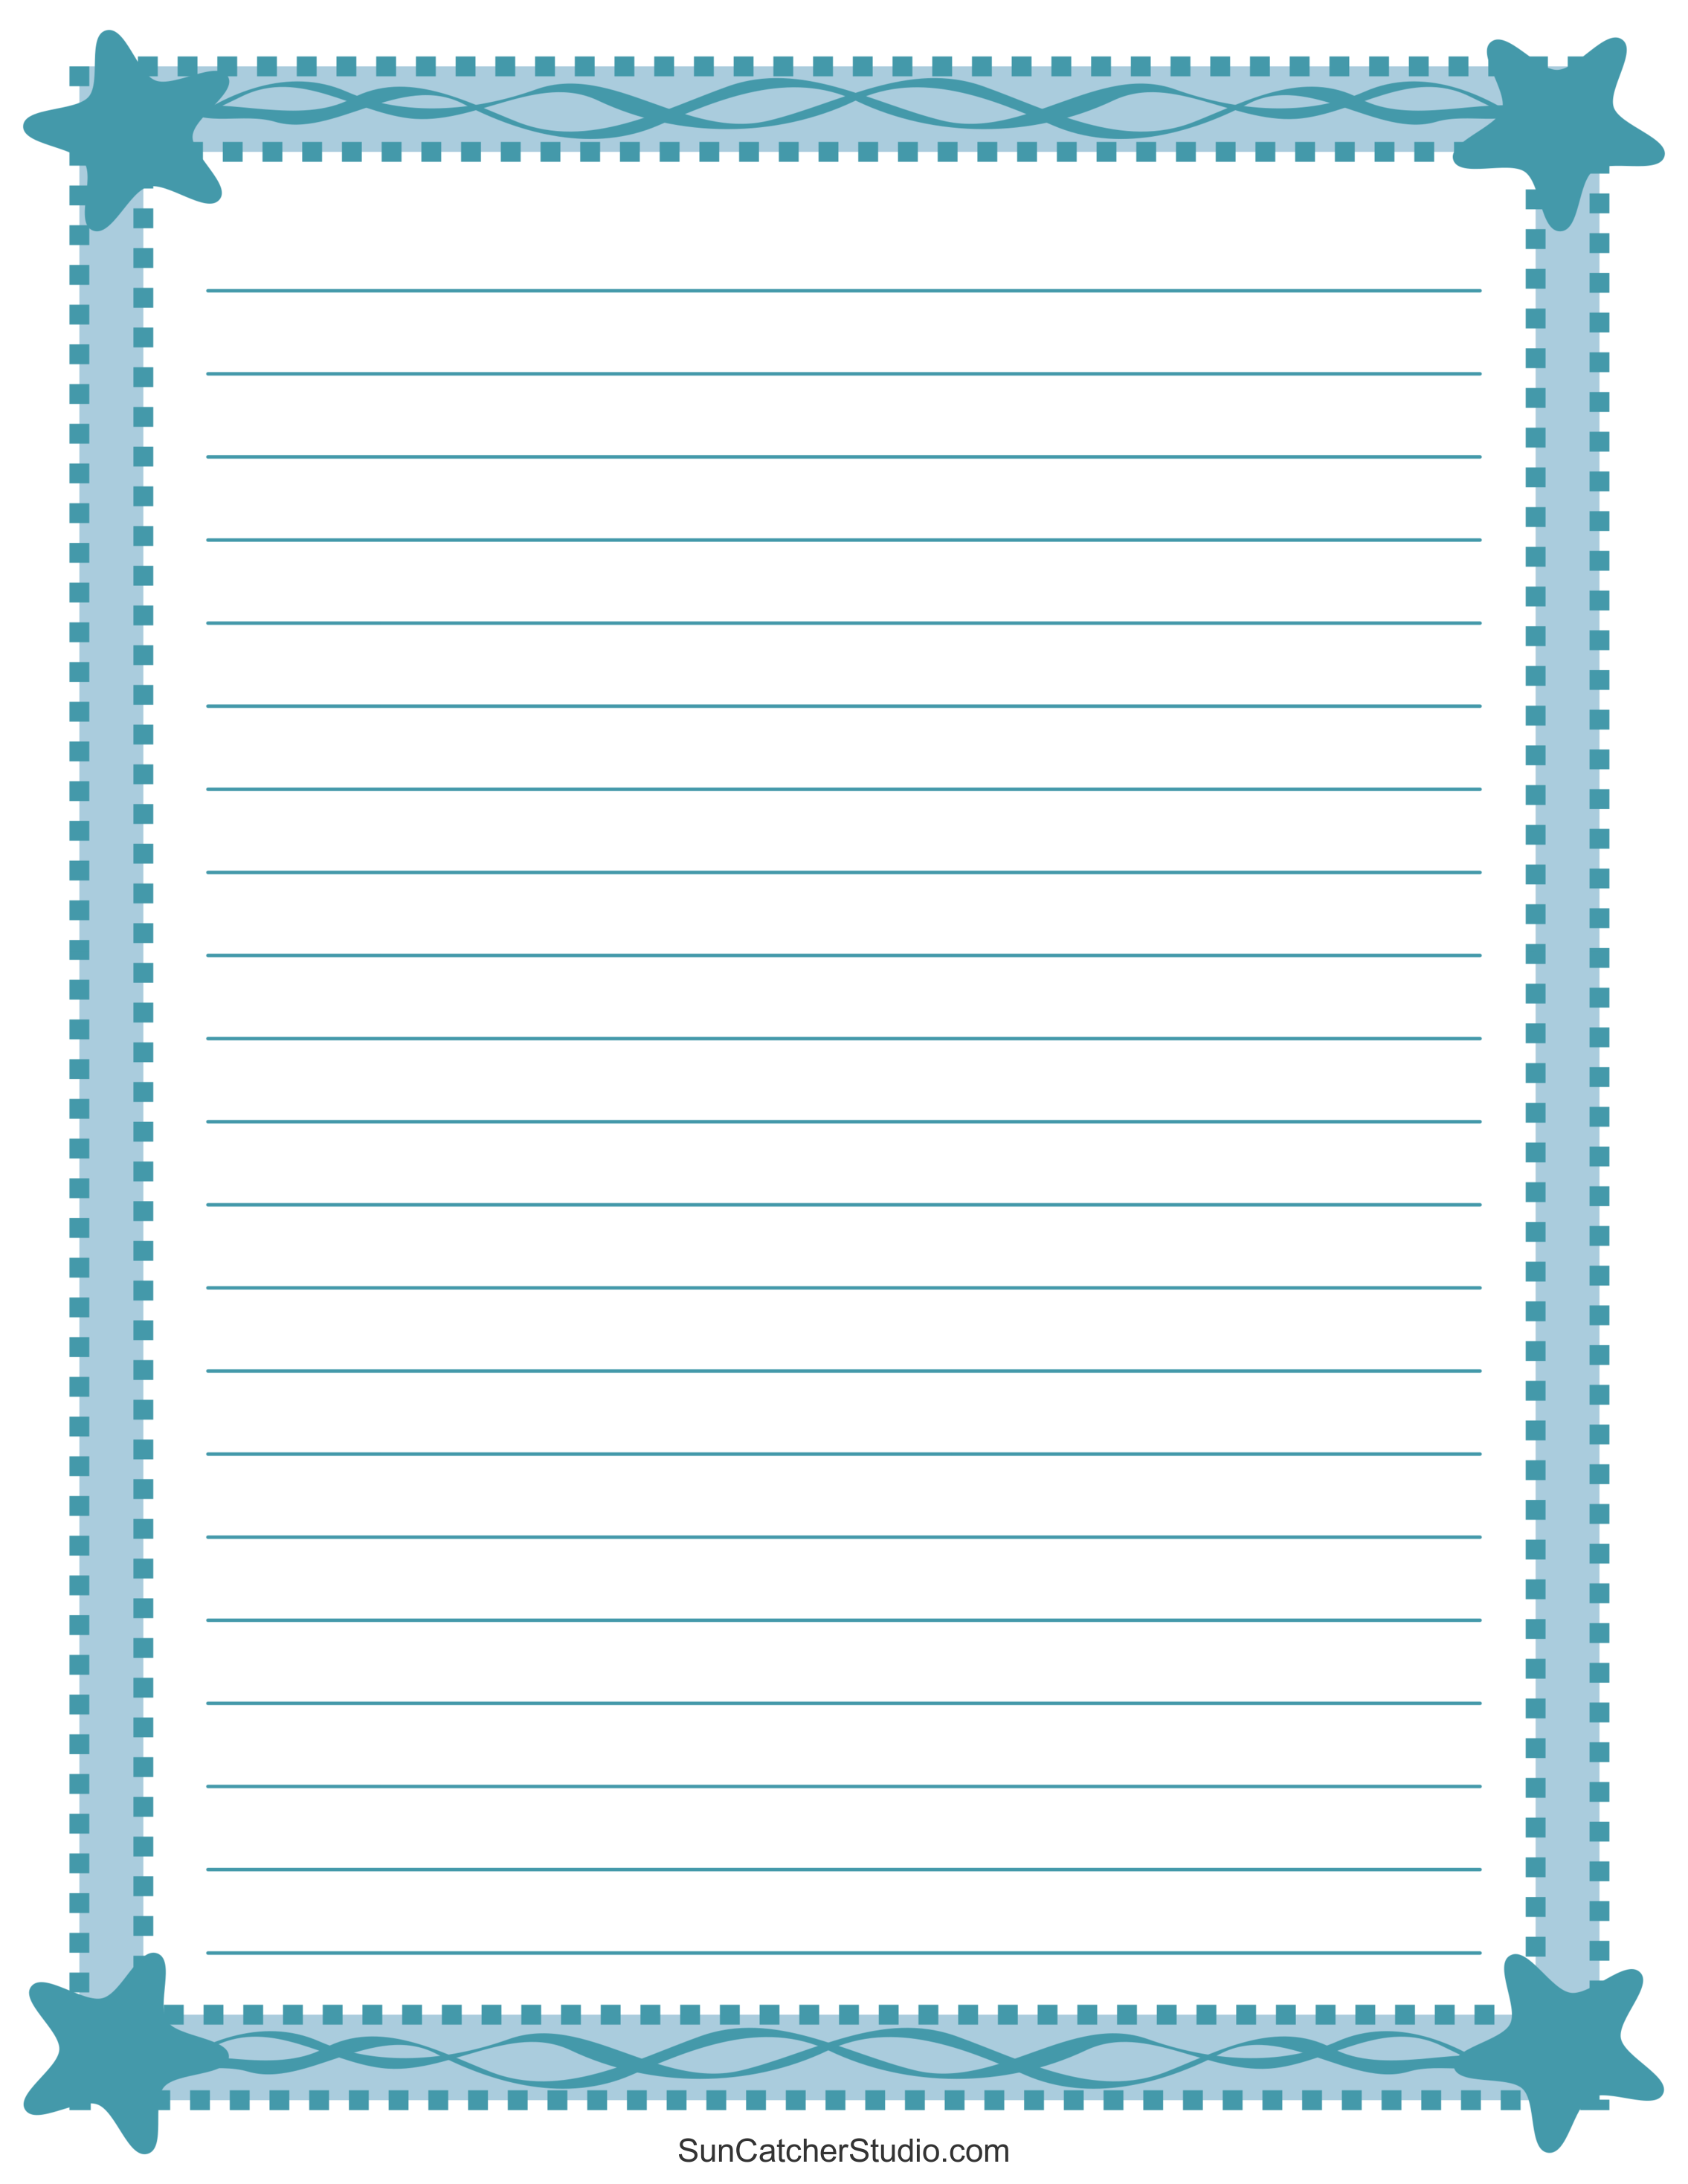 Free Printable Stationery, Stationary Paper, Letter Paper  Writing paper  printable stationery, Free printable stationery, Printable stationery